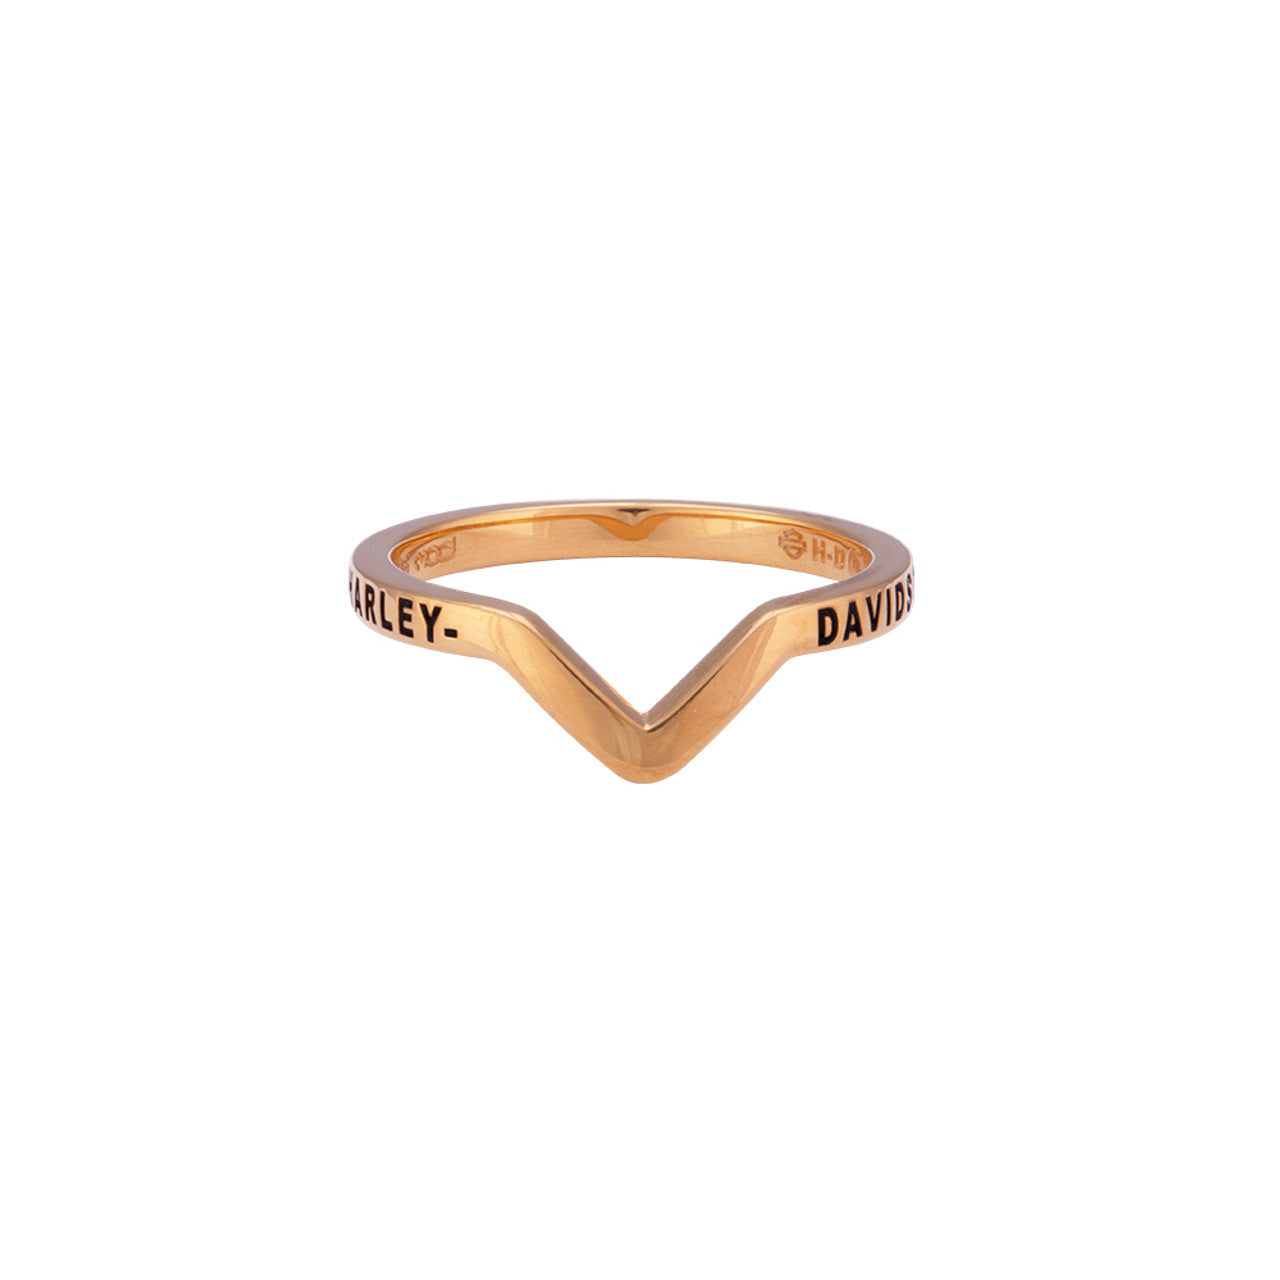 HARLEY-DAVIDSON® WOMEN'S GOLD PLATED CURVED STACKABLE RING HDR0495